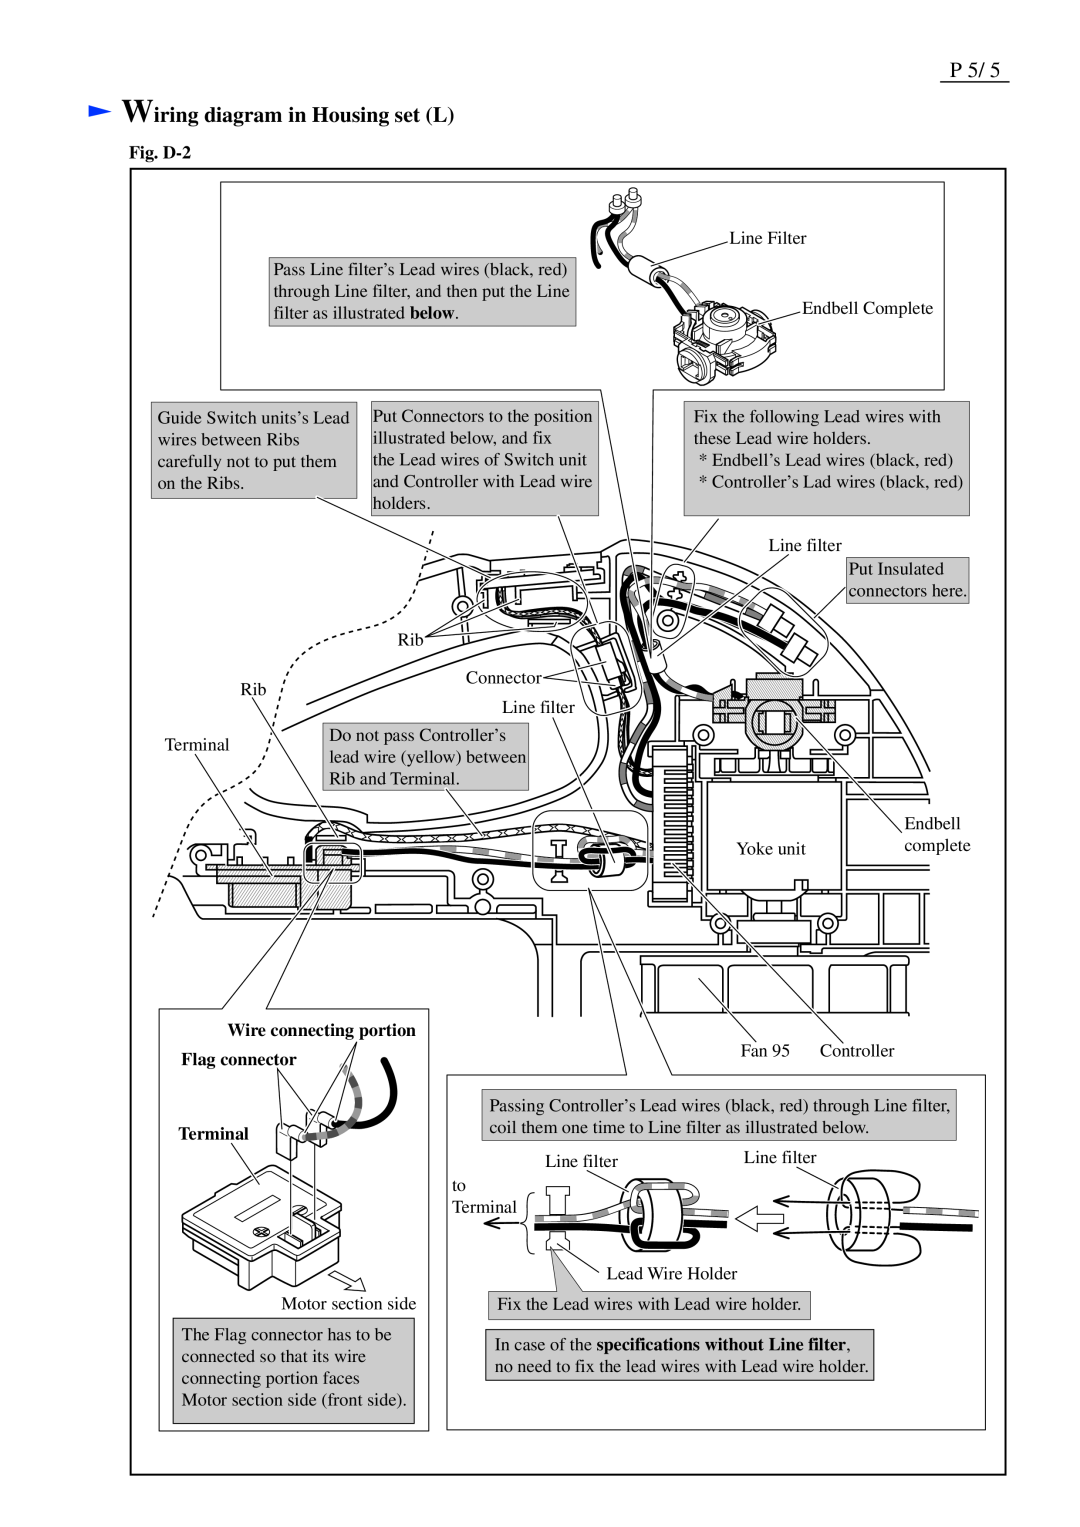 Makita BUB360 specifications Wiring diagram in Housing set L, Fig. D-2, Wire connecting portion Flag connector Terminal 